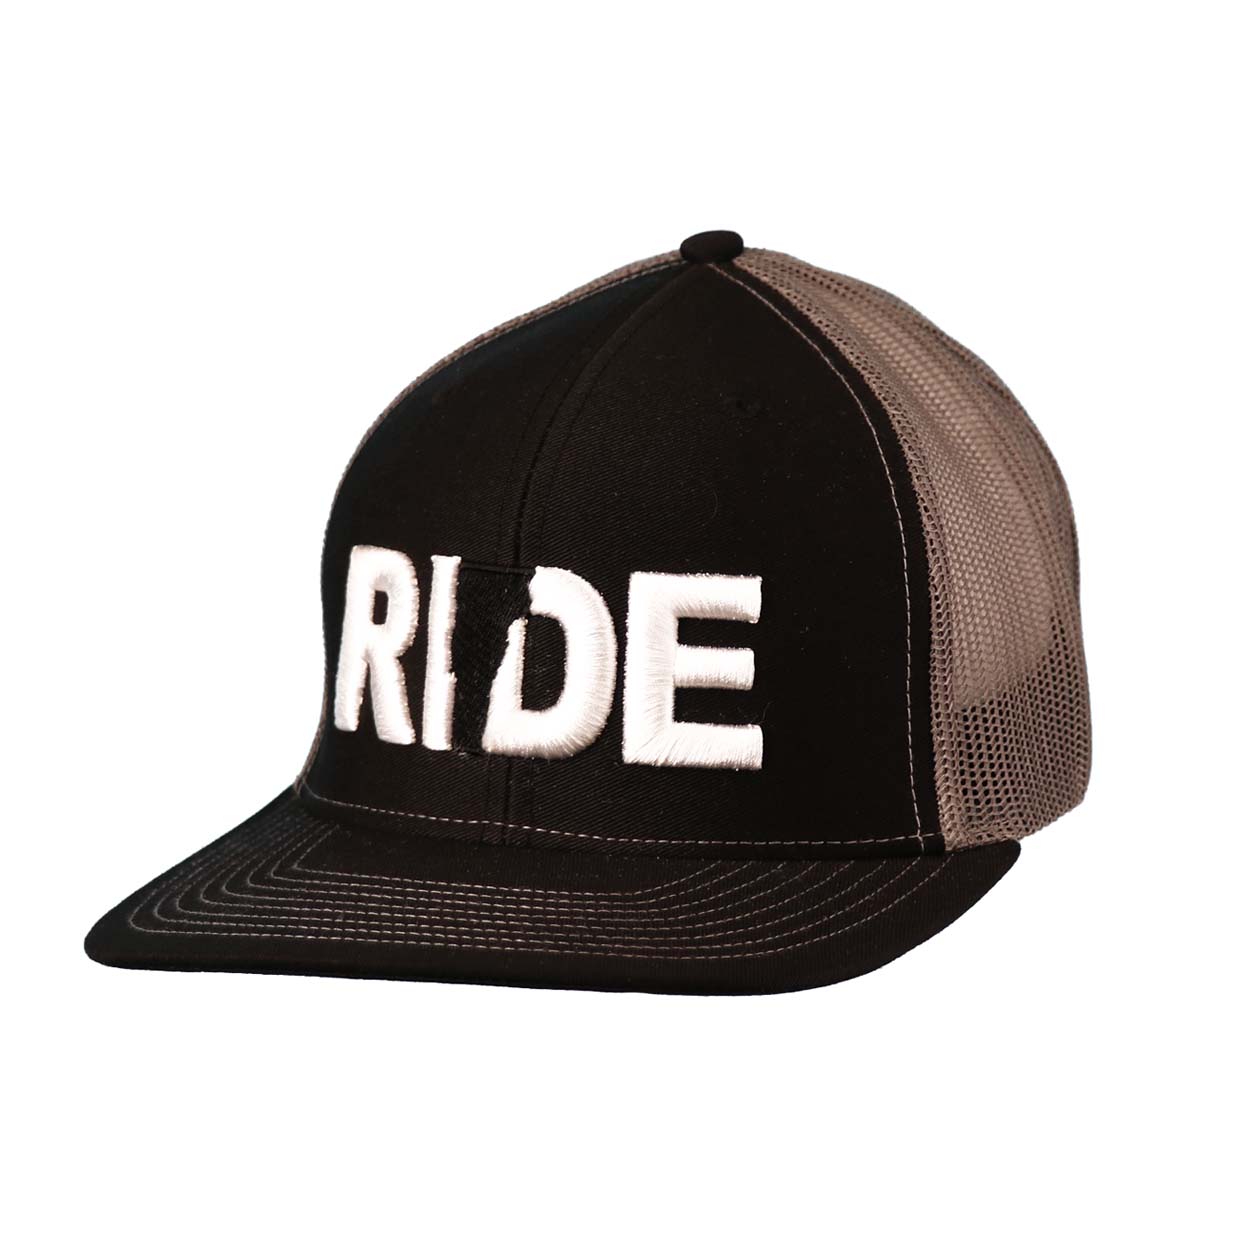 Ride Vermont Classic Embroidered Snapback Trucker Hat Black/Charcoal